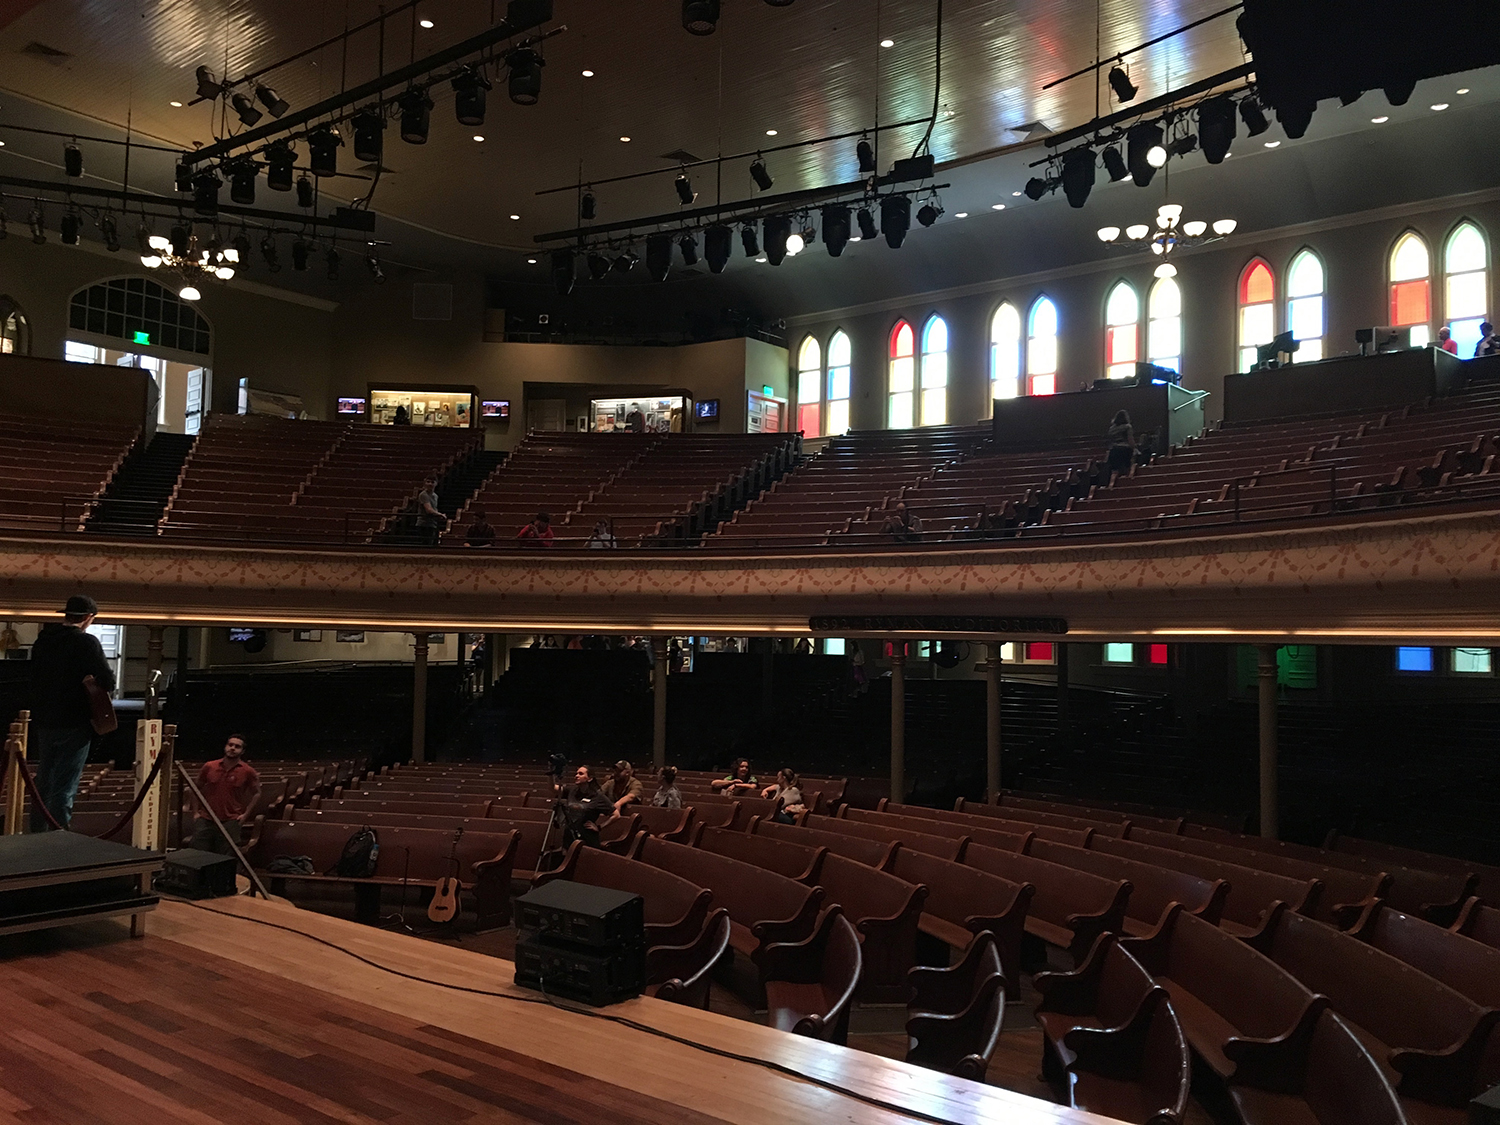  View of the Ryman auditorium from the stage wings. 